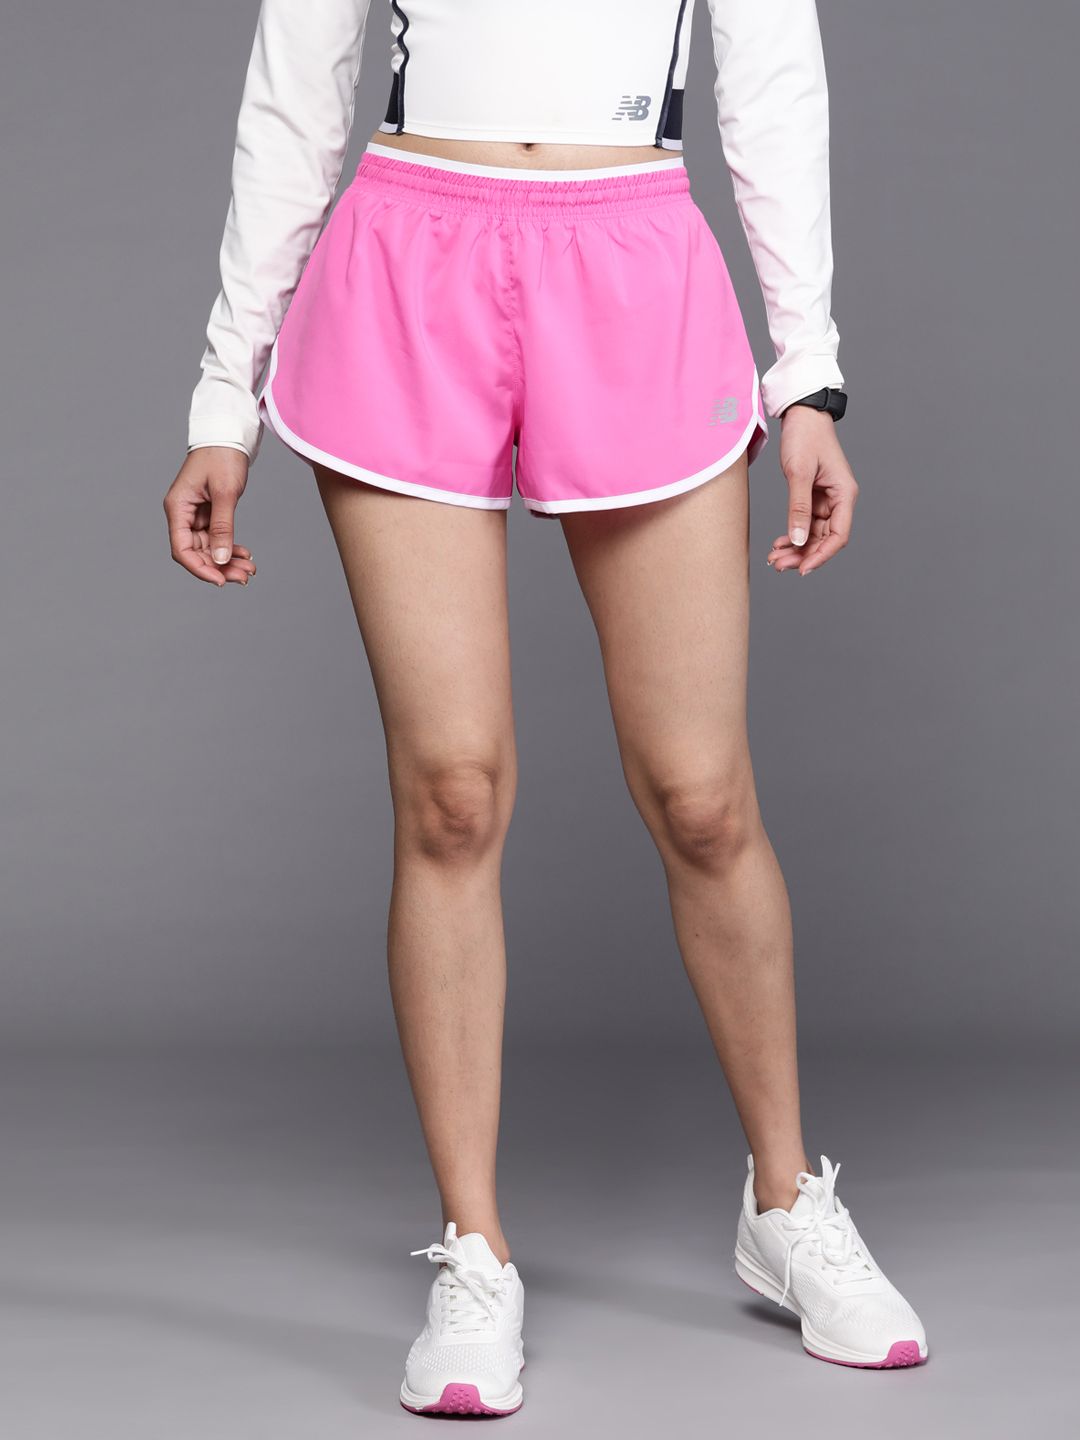 New Balance Women Pink Sports Shorts Price in India